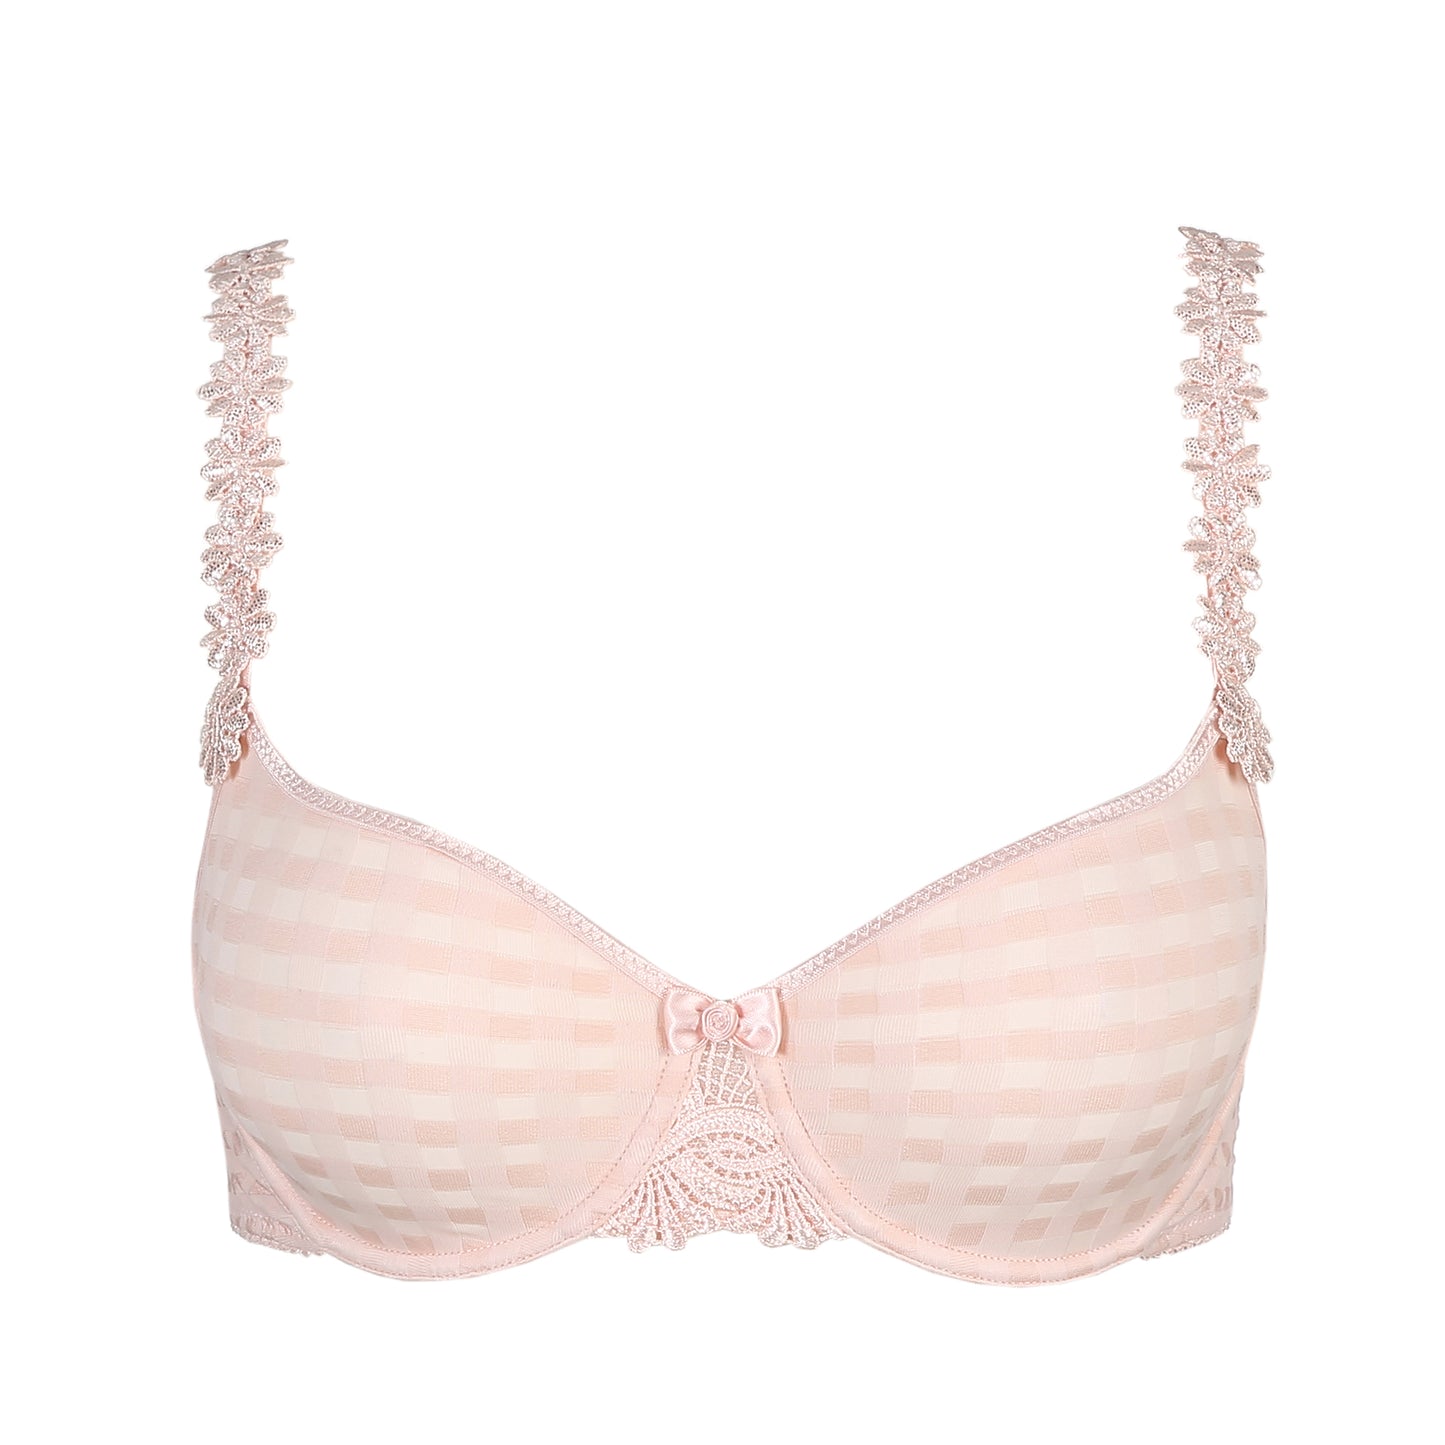 Marie Jo Avero volle cup bh naadloos pearly pink